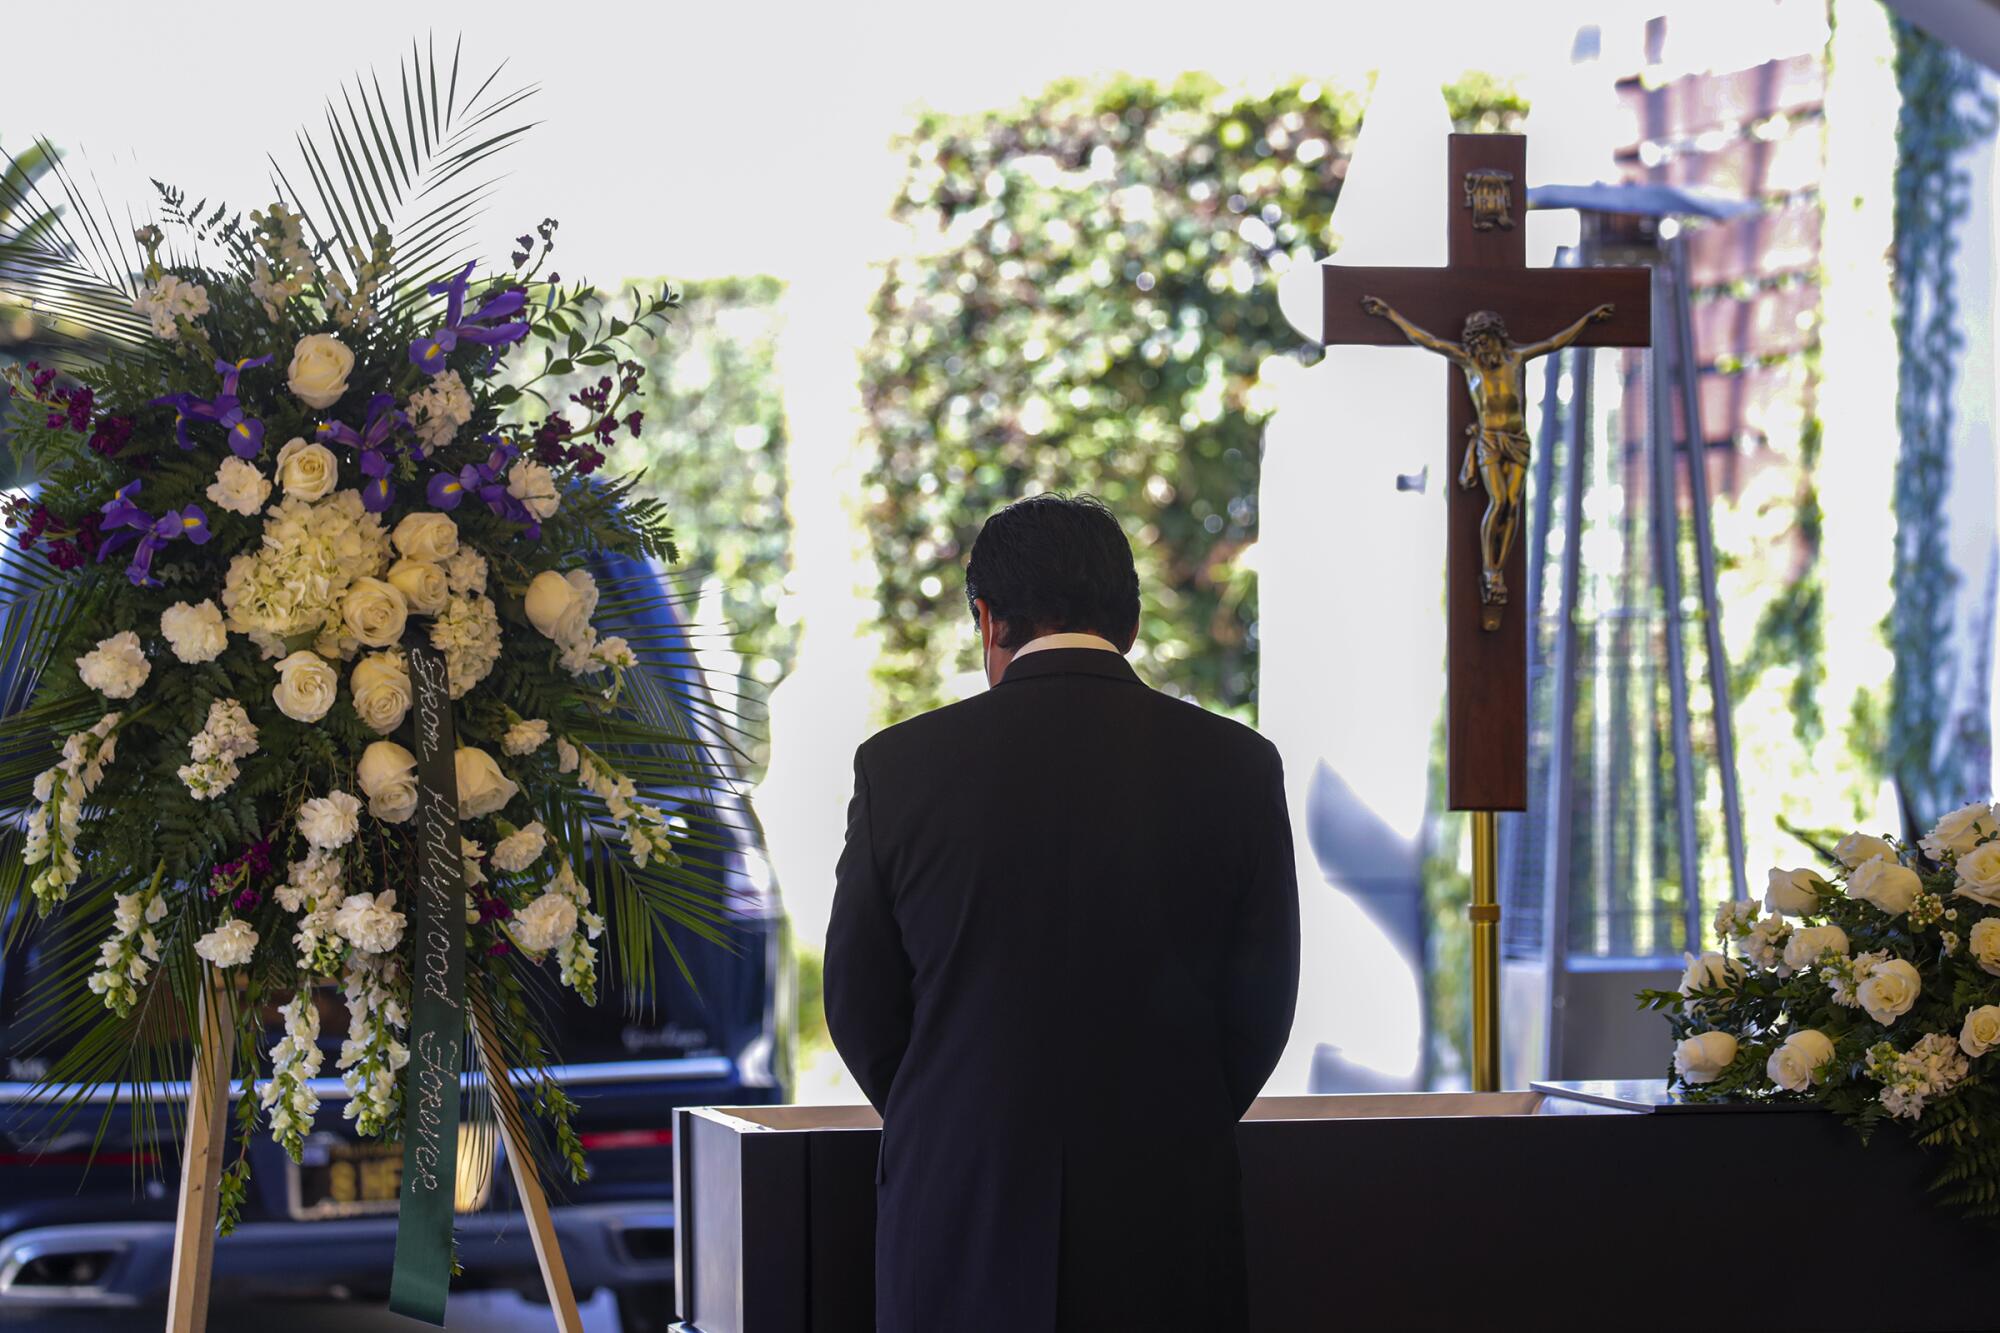 A man, seen from behind, stands at an open casket flanked by floral arrangements and a crucifix